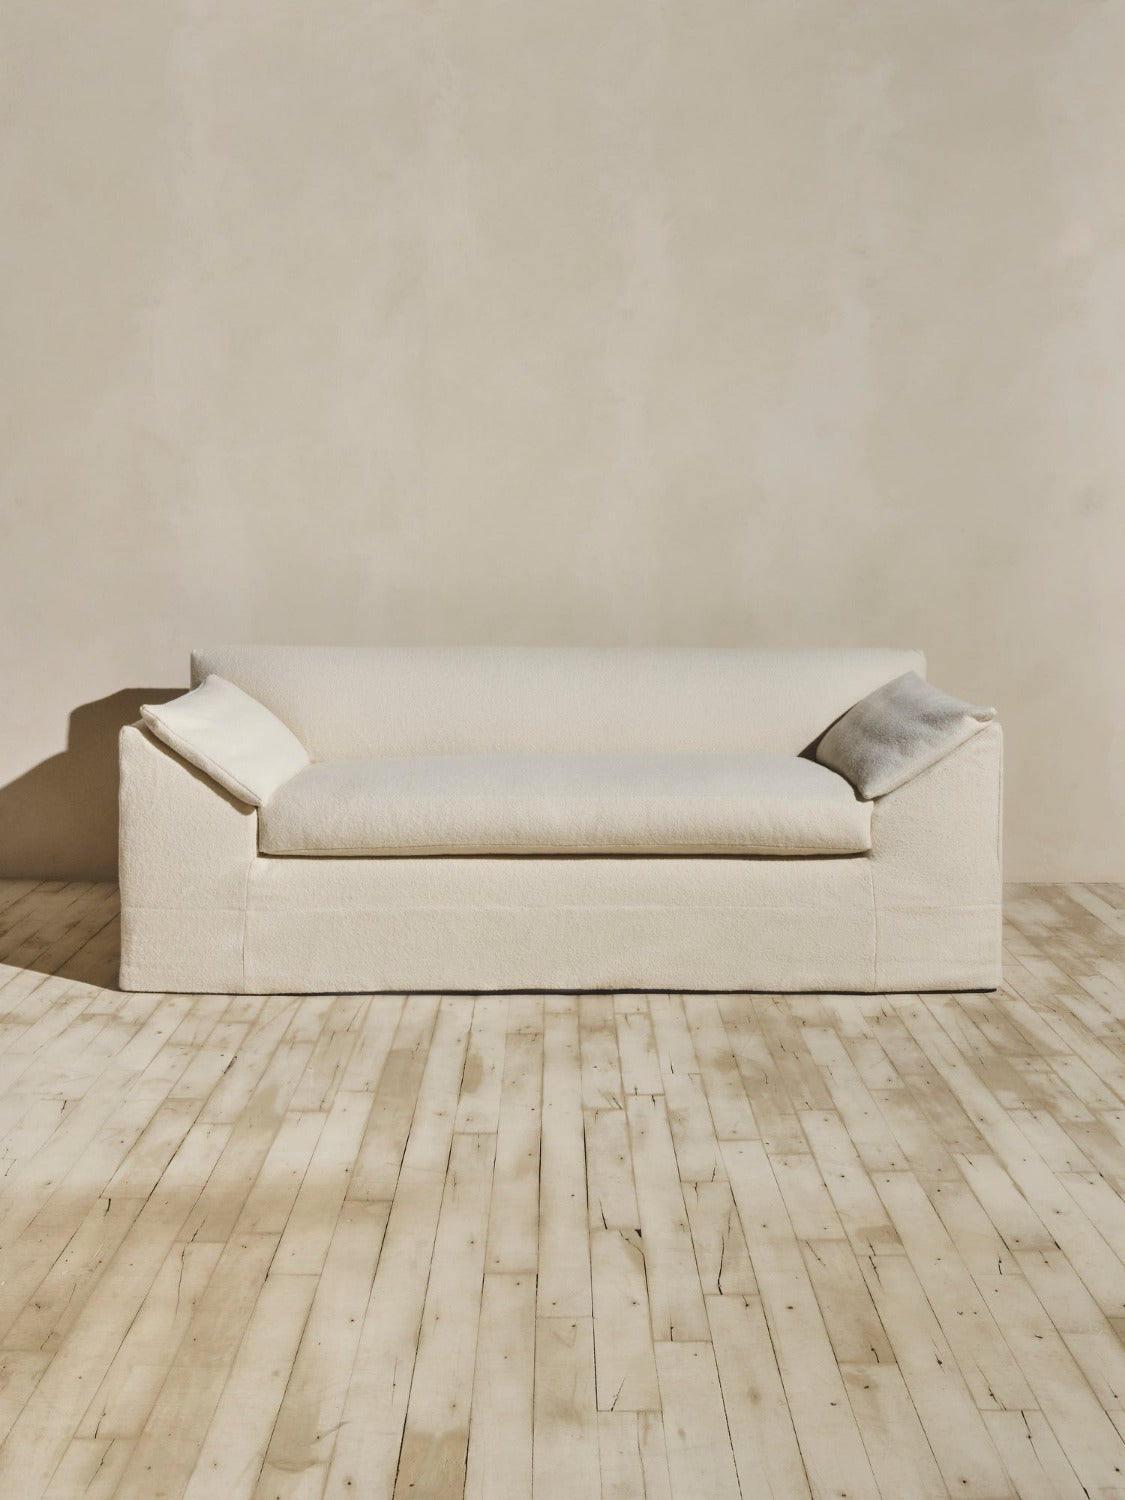 The Bromley Sofa in our crema fabric.